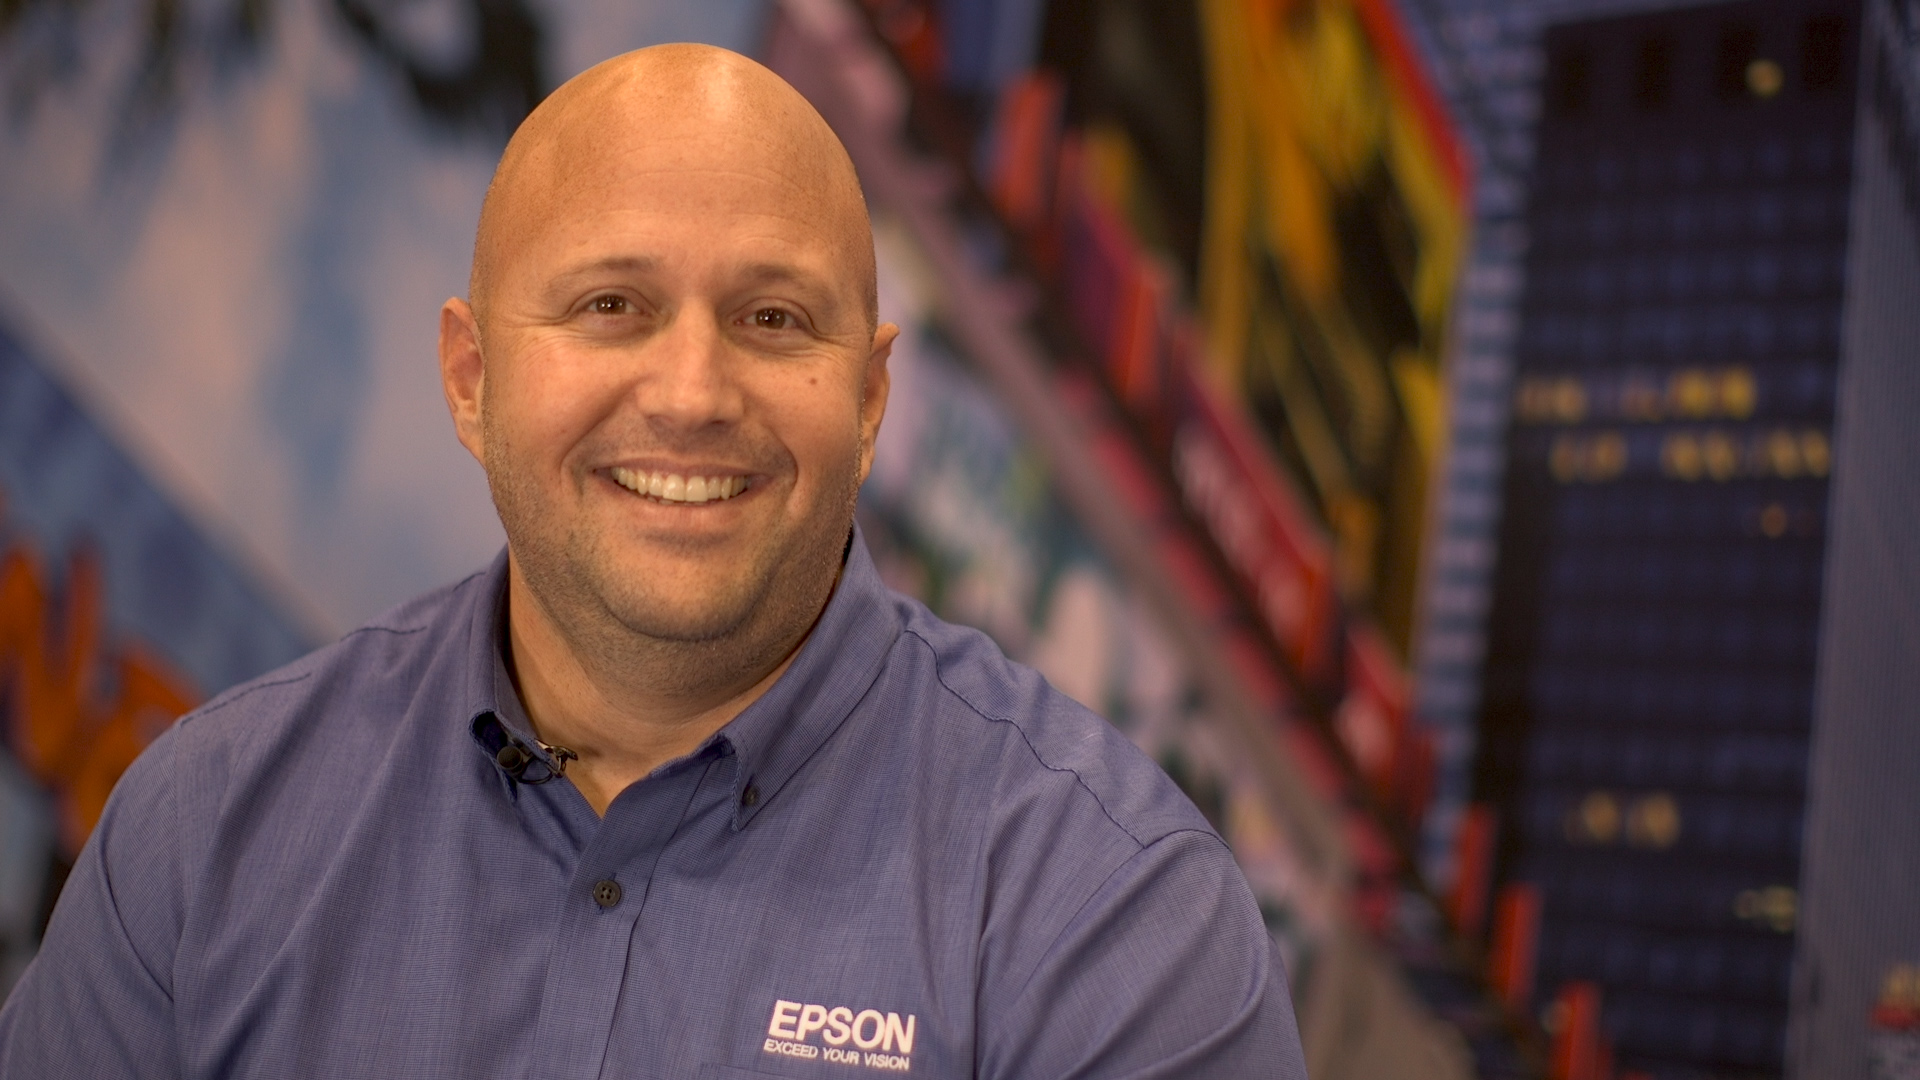 Epson’s 20 Years of Wide-Format Printing